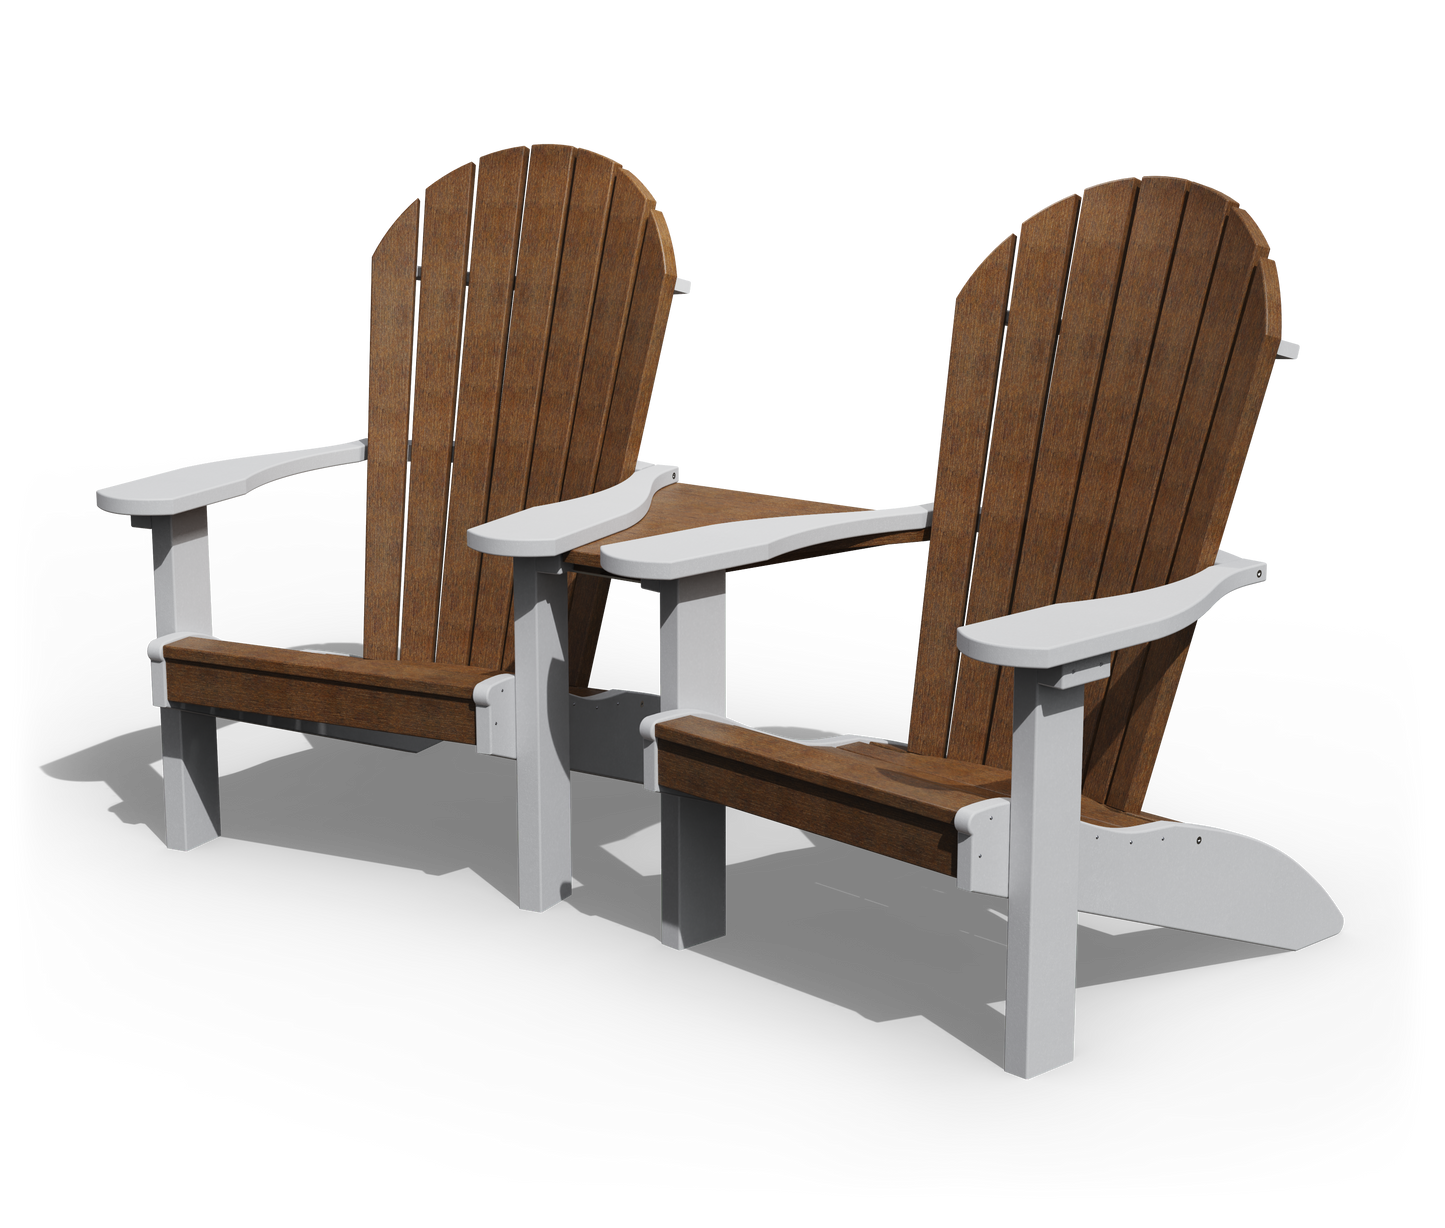 Patiova Recycled Plastic Adirondack Chair Centerpiece (CHAIRS SOLD SEPARATELY) - LEAD TIME TO SHIP 3 WEEKS